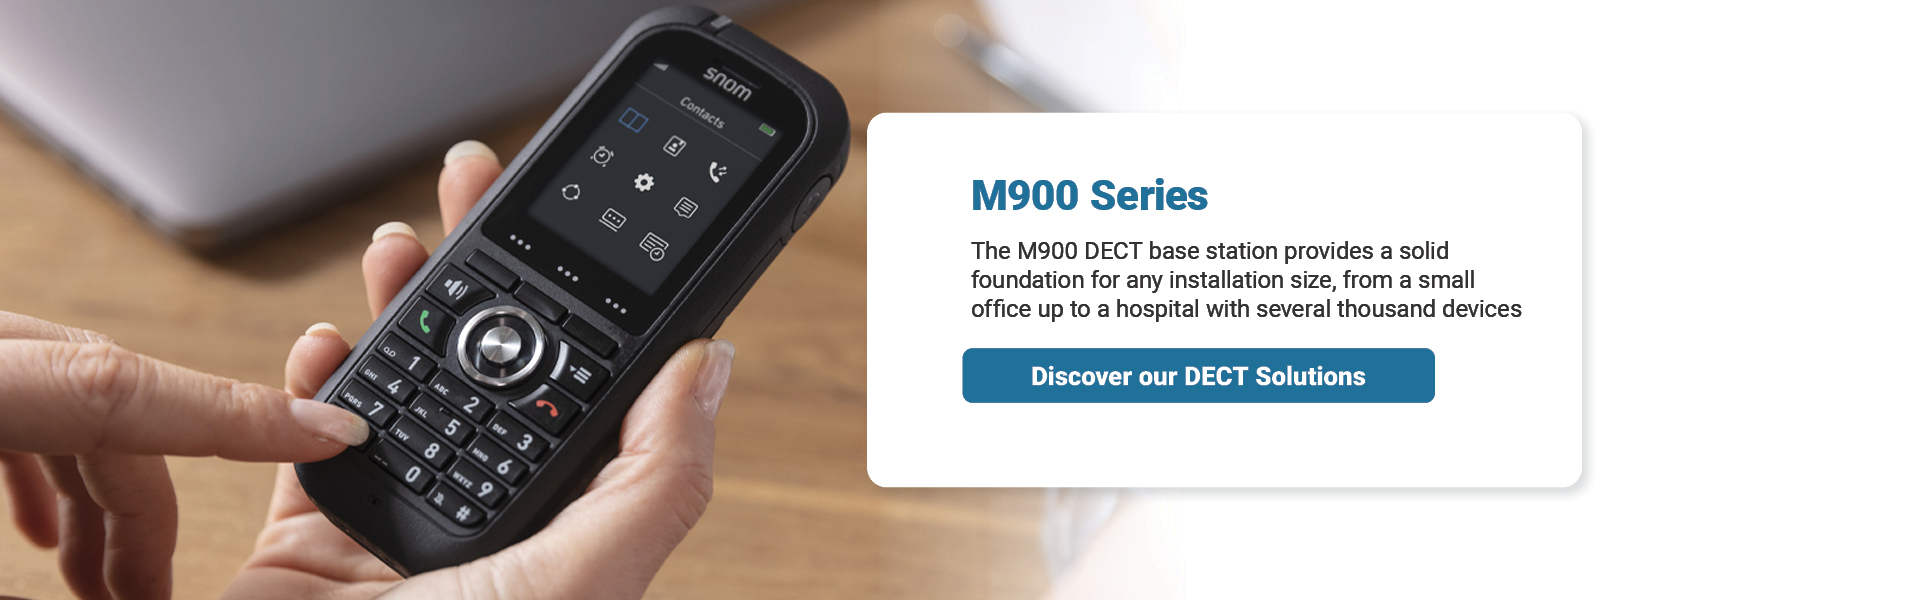 {"_multiLang":true,"en":"M900 Series | The M900 DECT base station provides a solid foundation for any installation size, from a small office up to a hospital with several thousand devices | Discover o